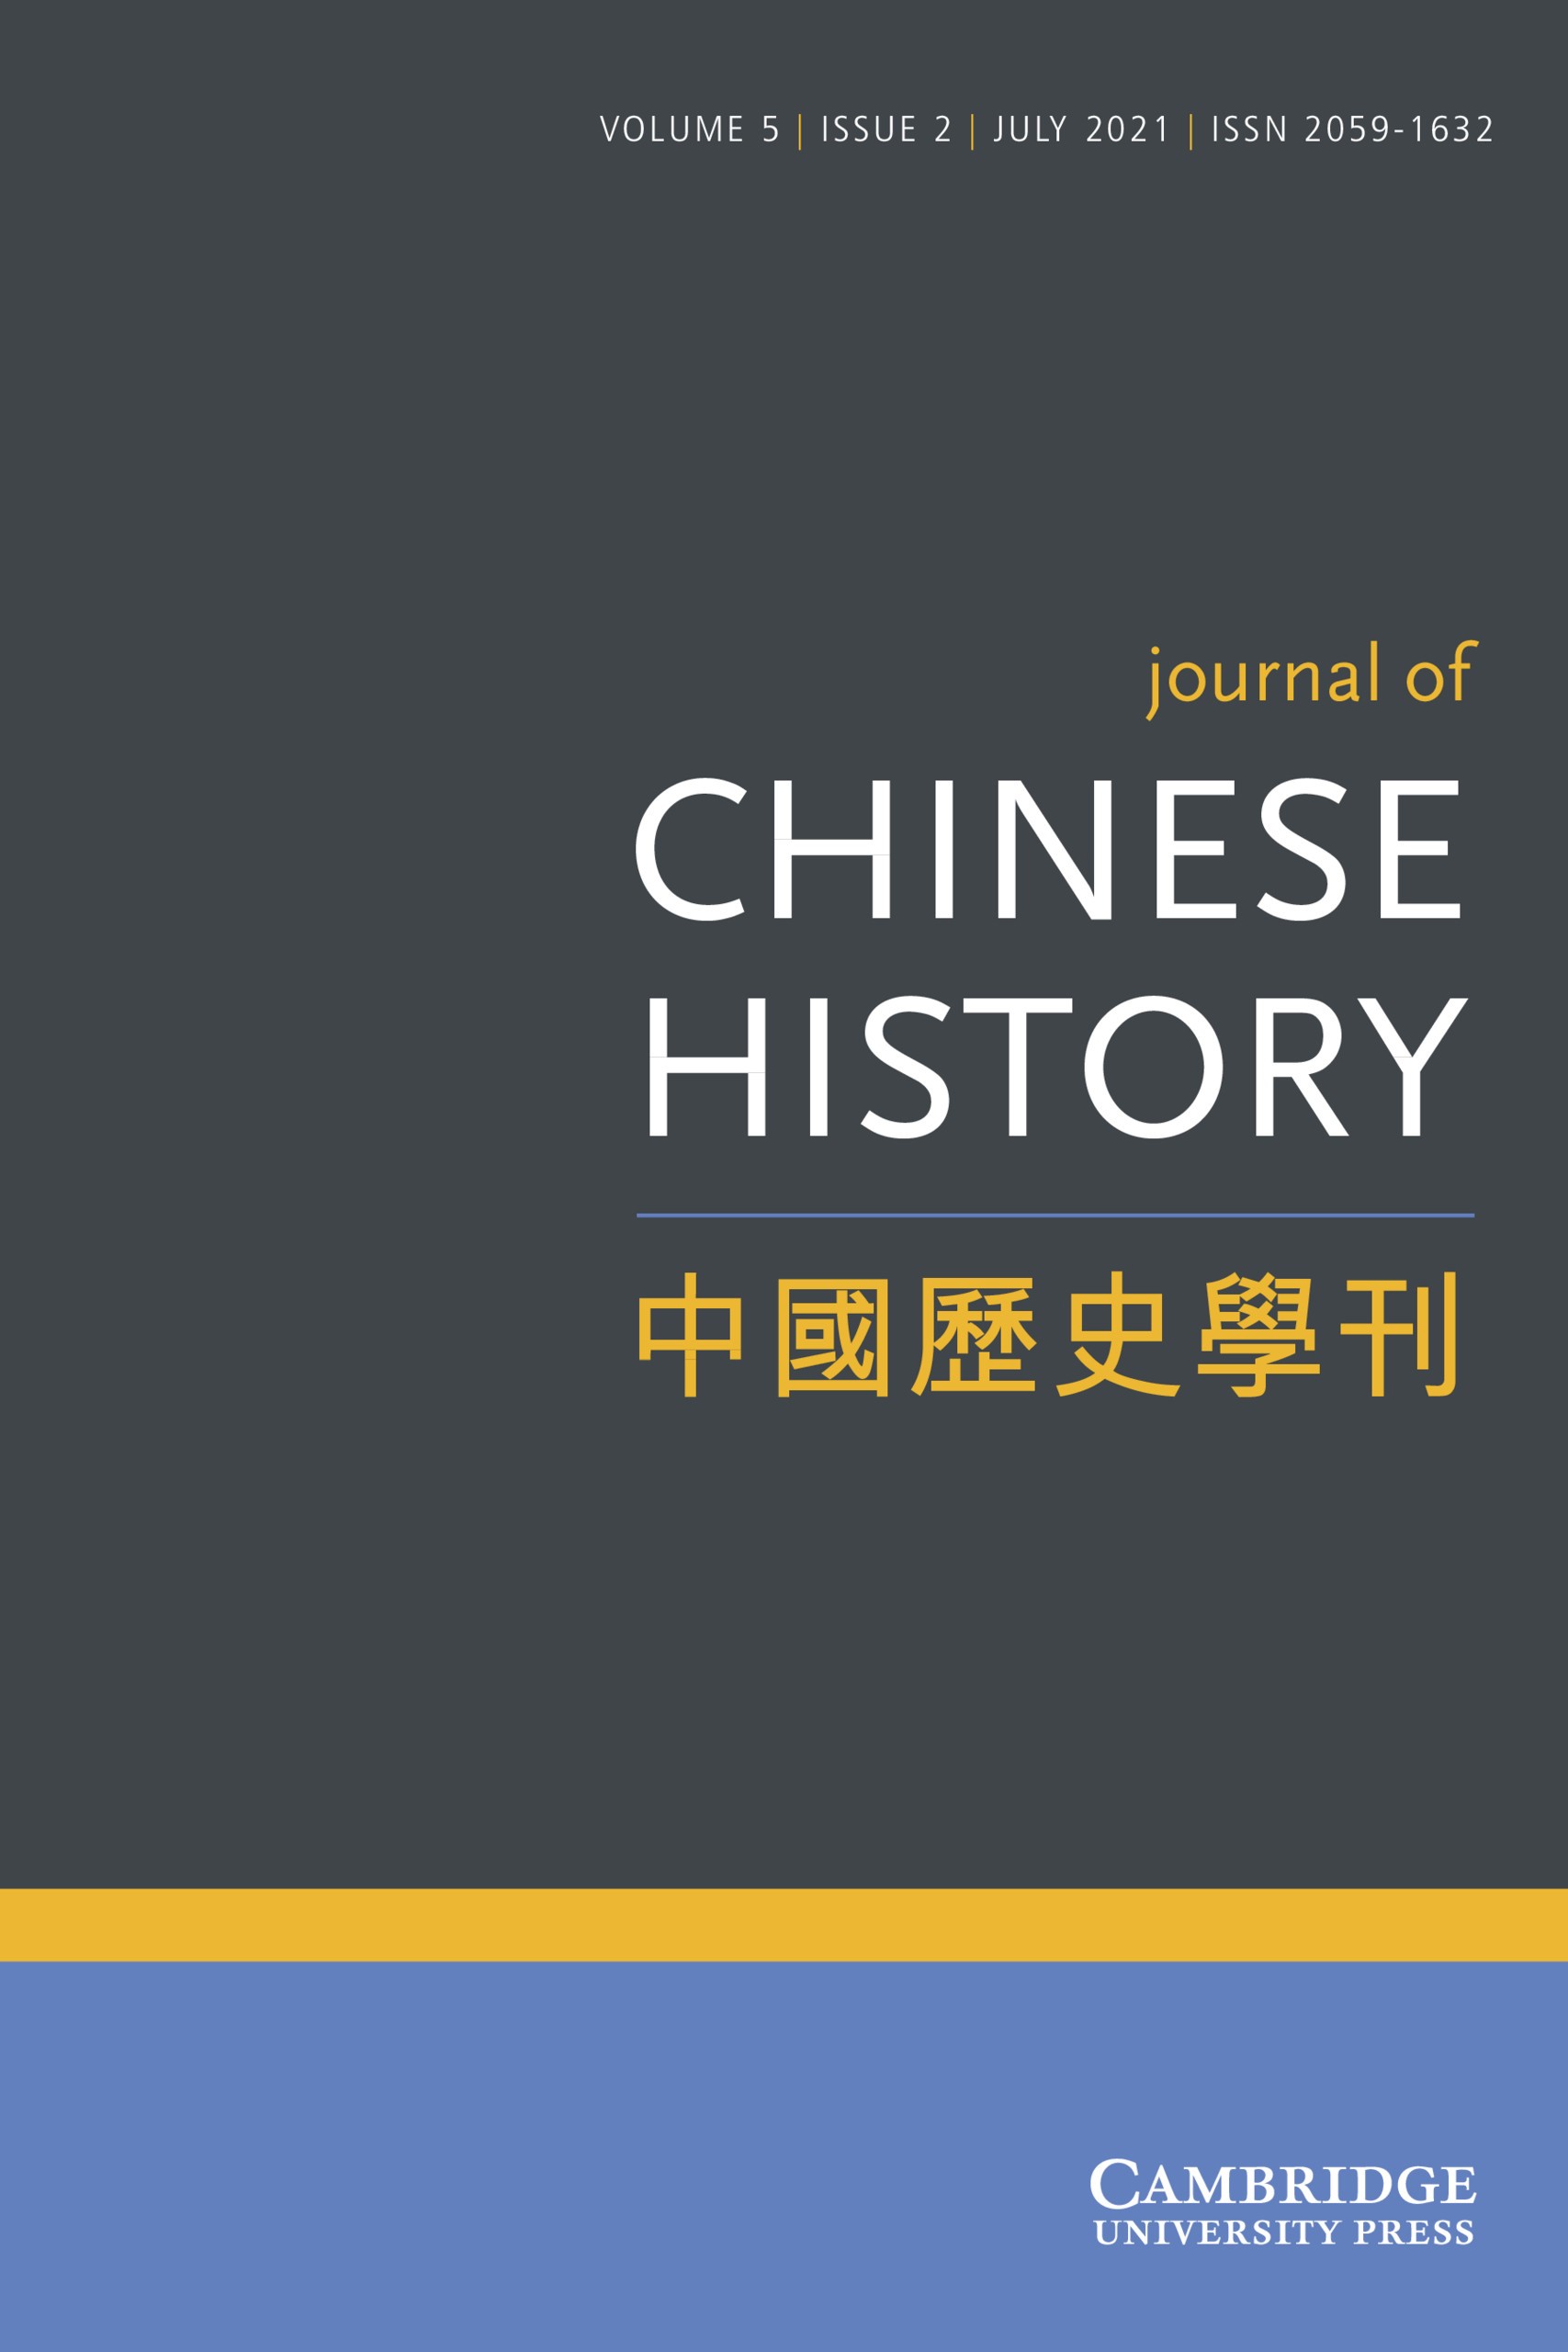 research on china studies